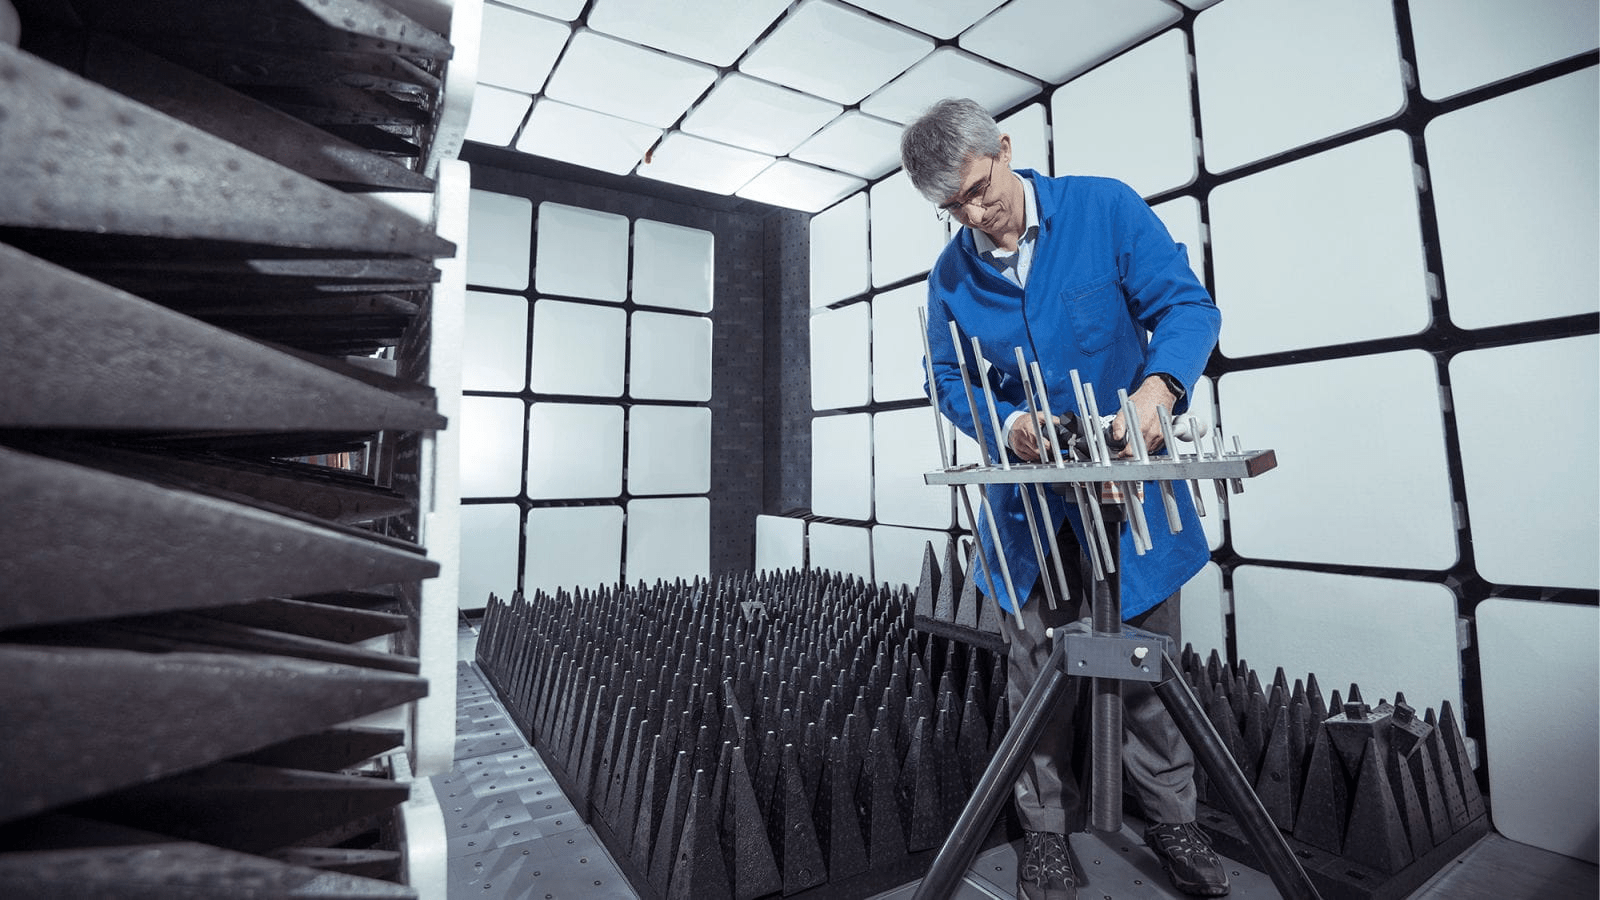 A man in a blue coat assembles an antenna in a small room